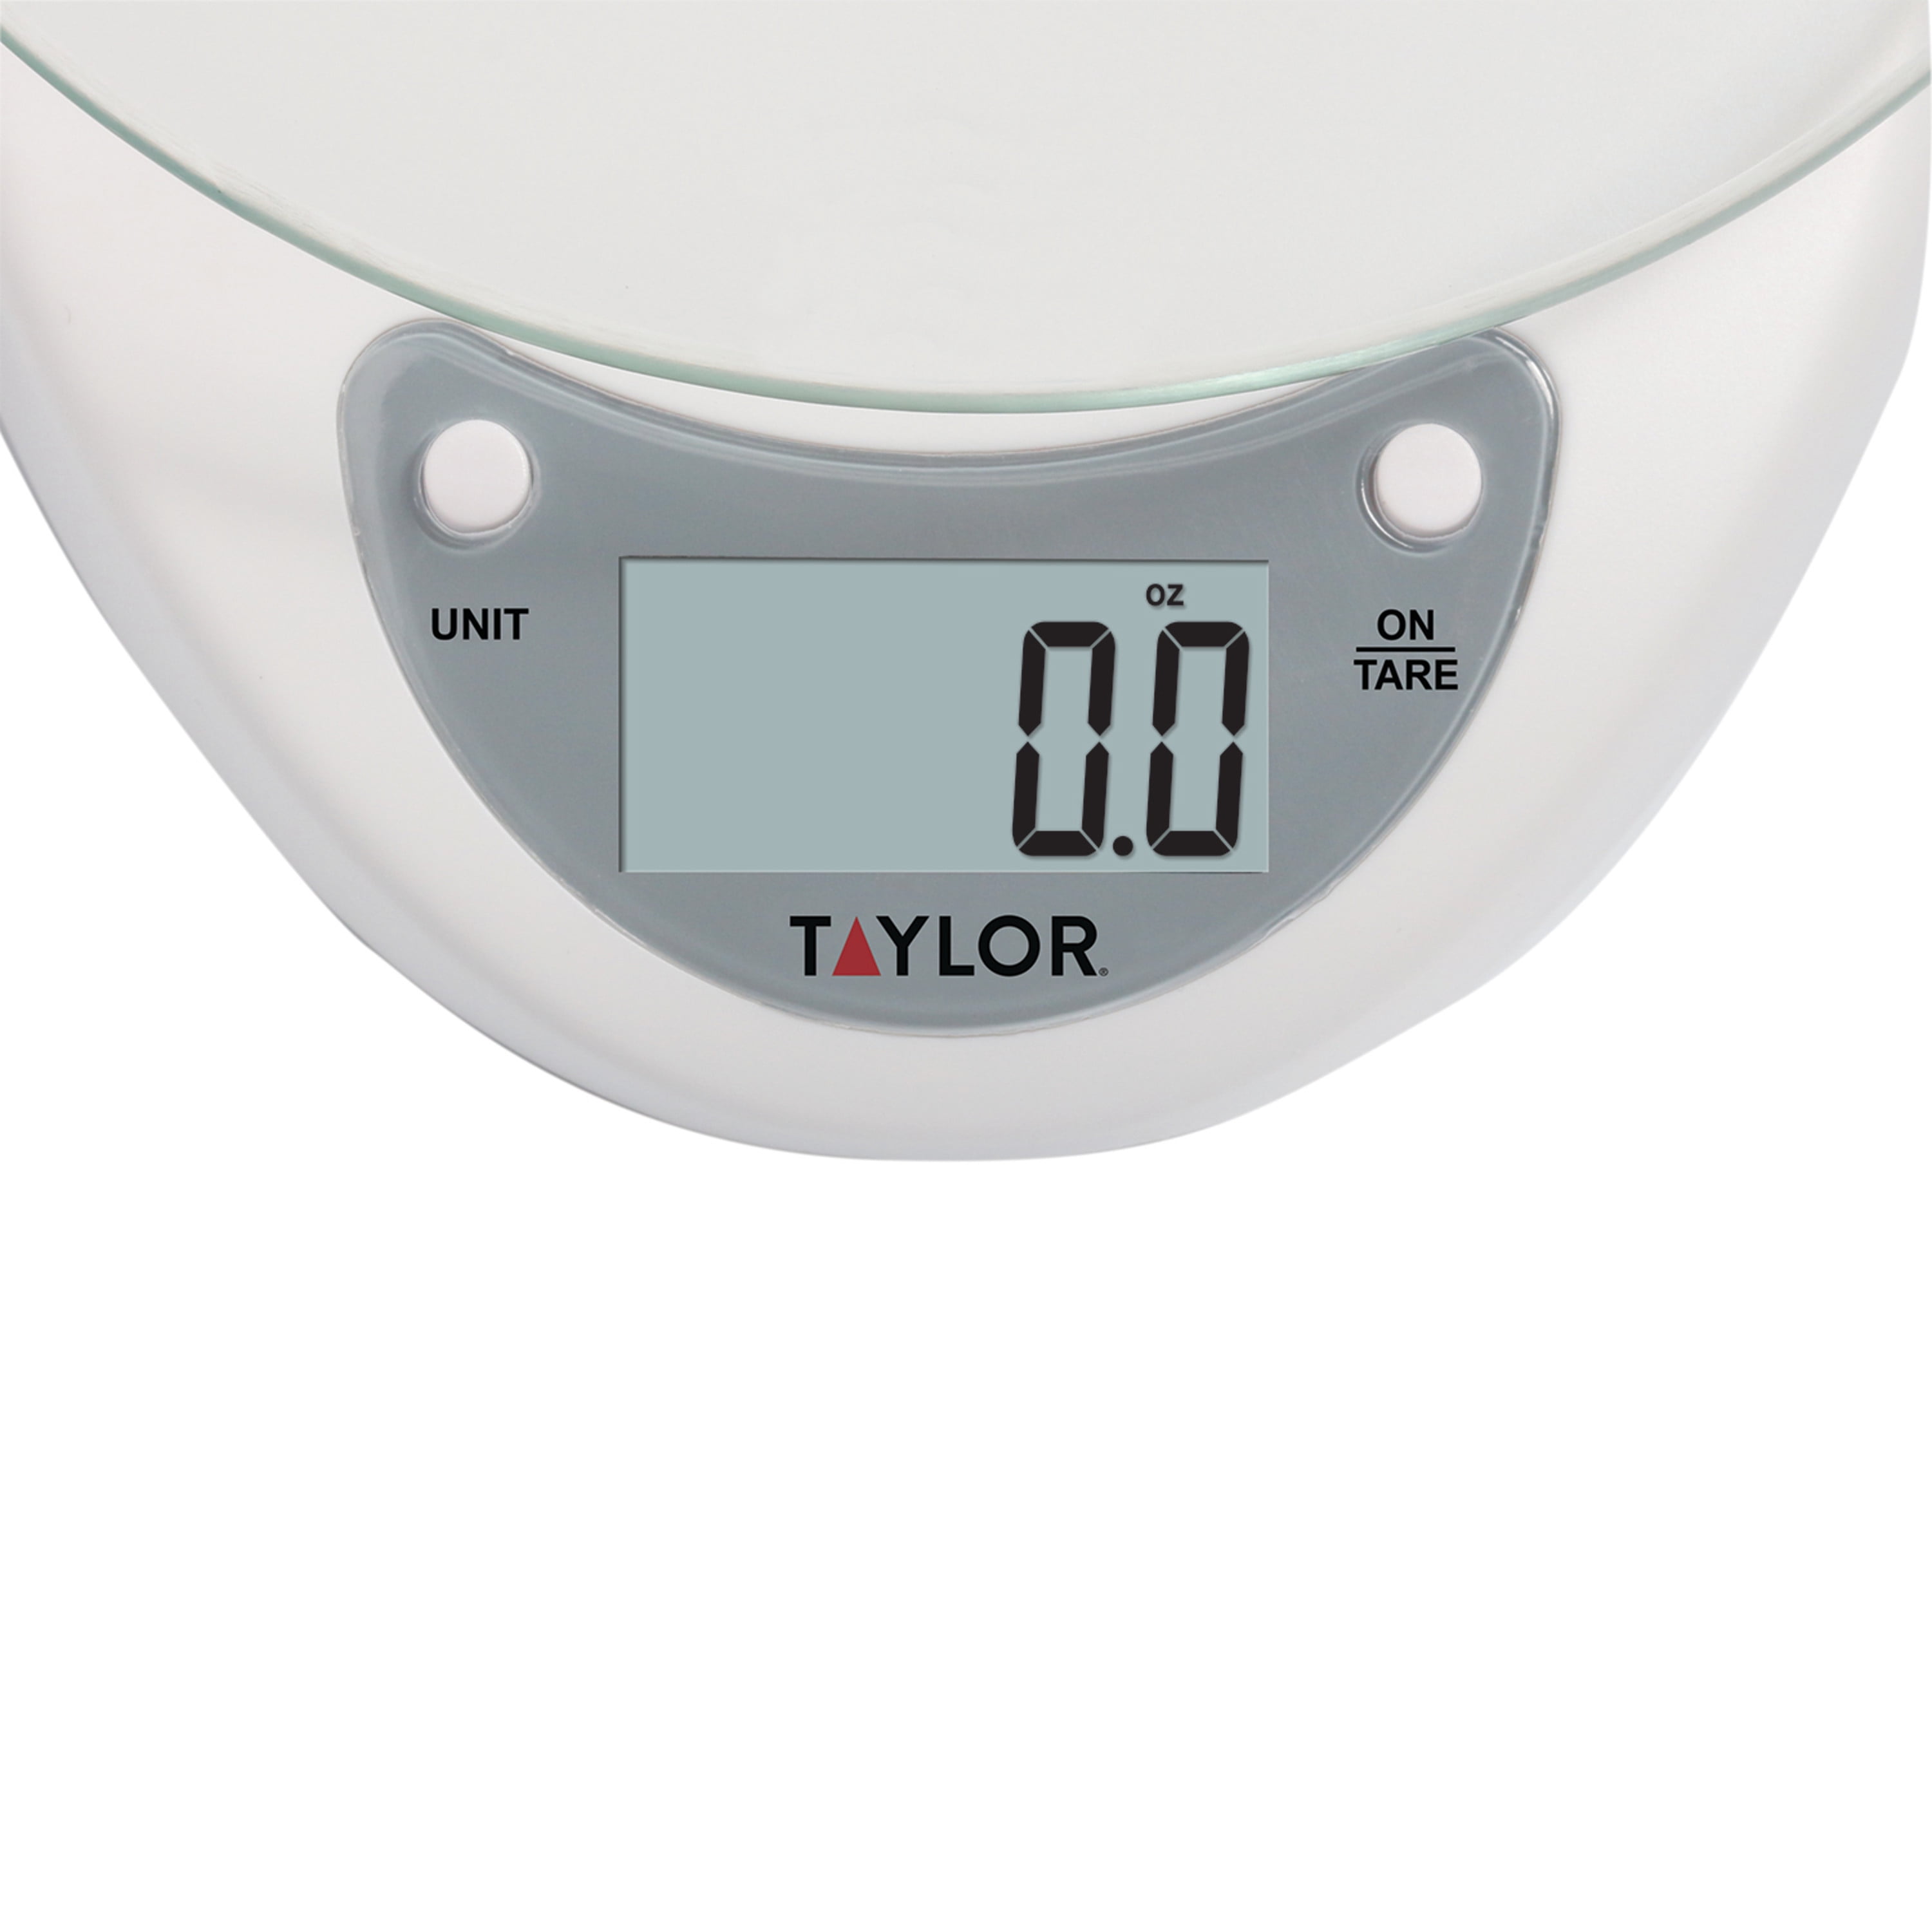 CB16658 66 lbs Weight Scale Digital Food Scales Count Scale, White & Black,  1 - Kroger